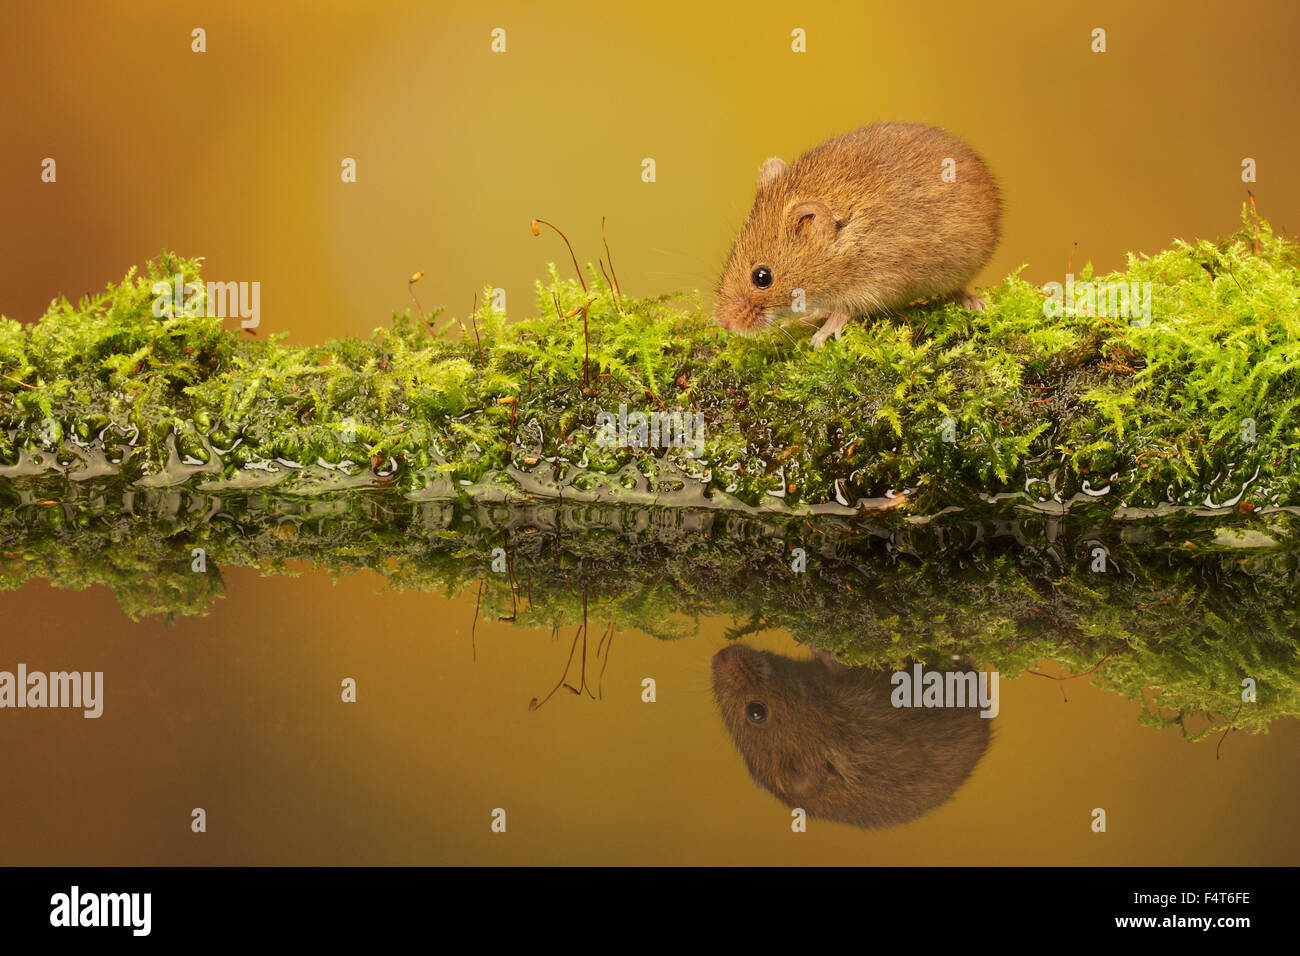 A cute little harvest mouse in a reflection pool Stock Photo